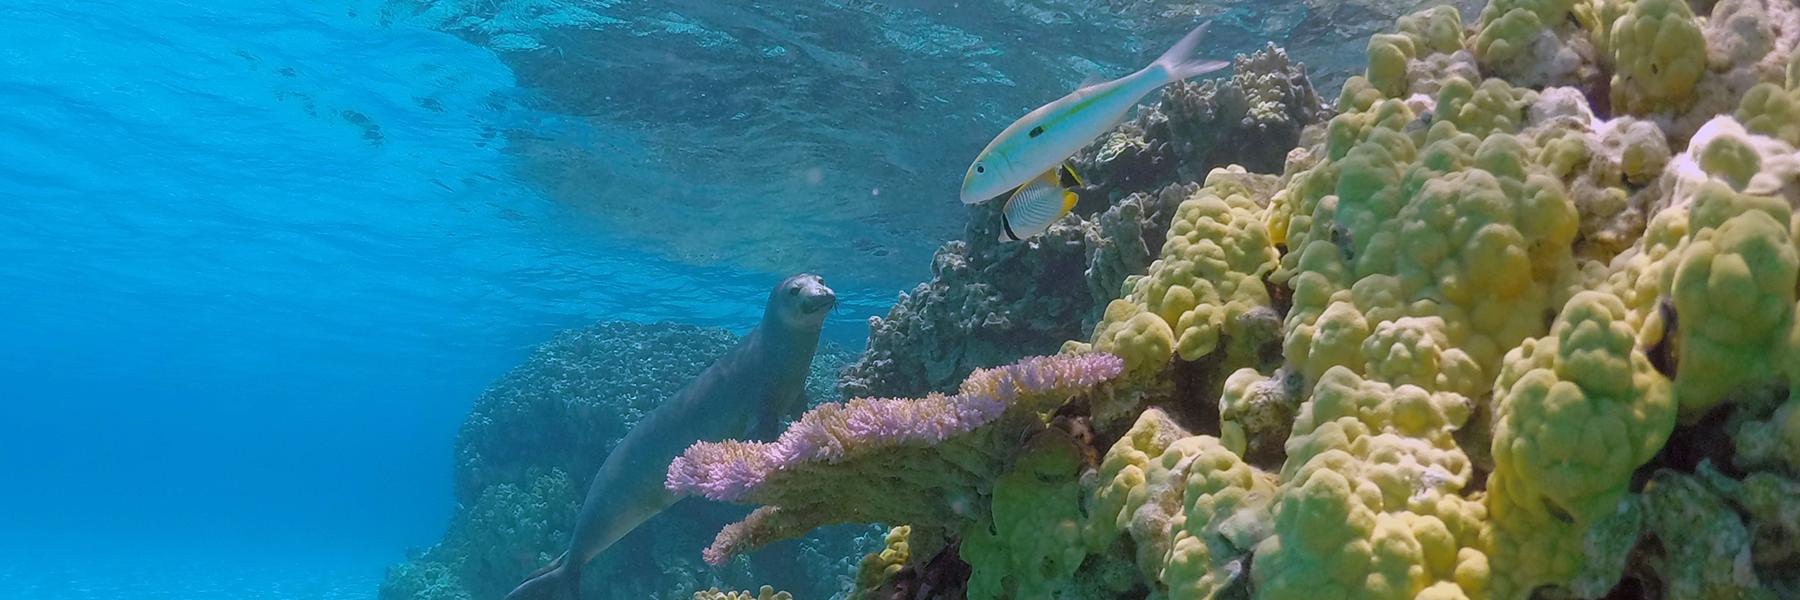 Undersea view of fish and a juvenile monk seal swimming around coral